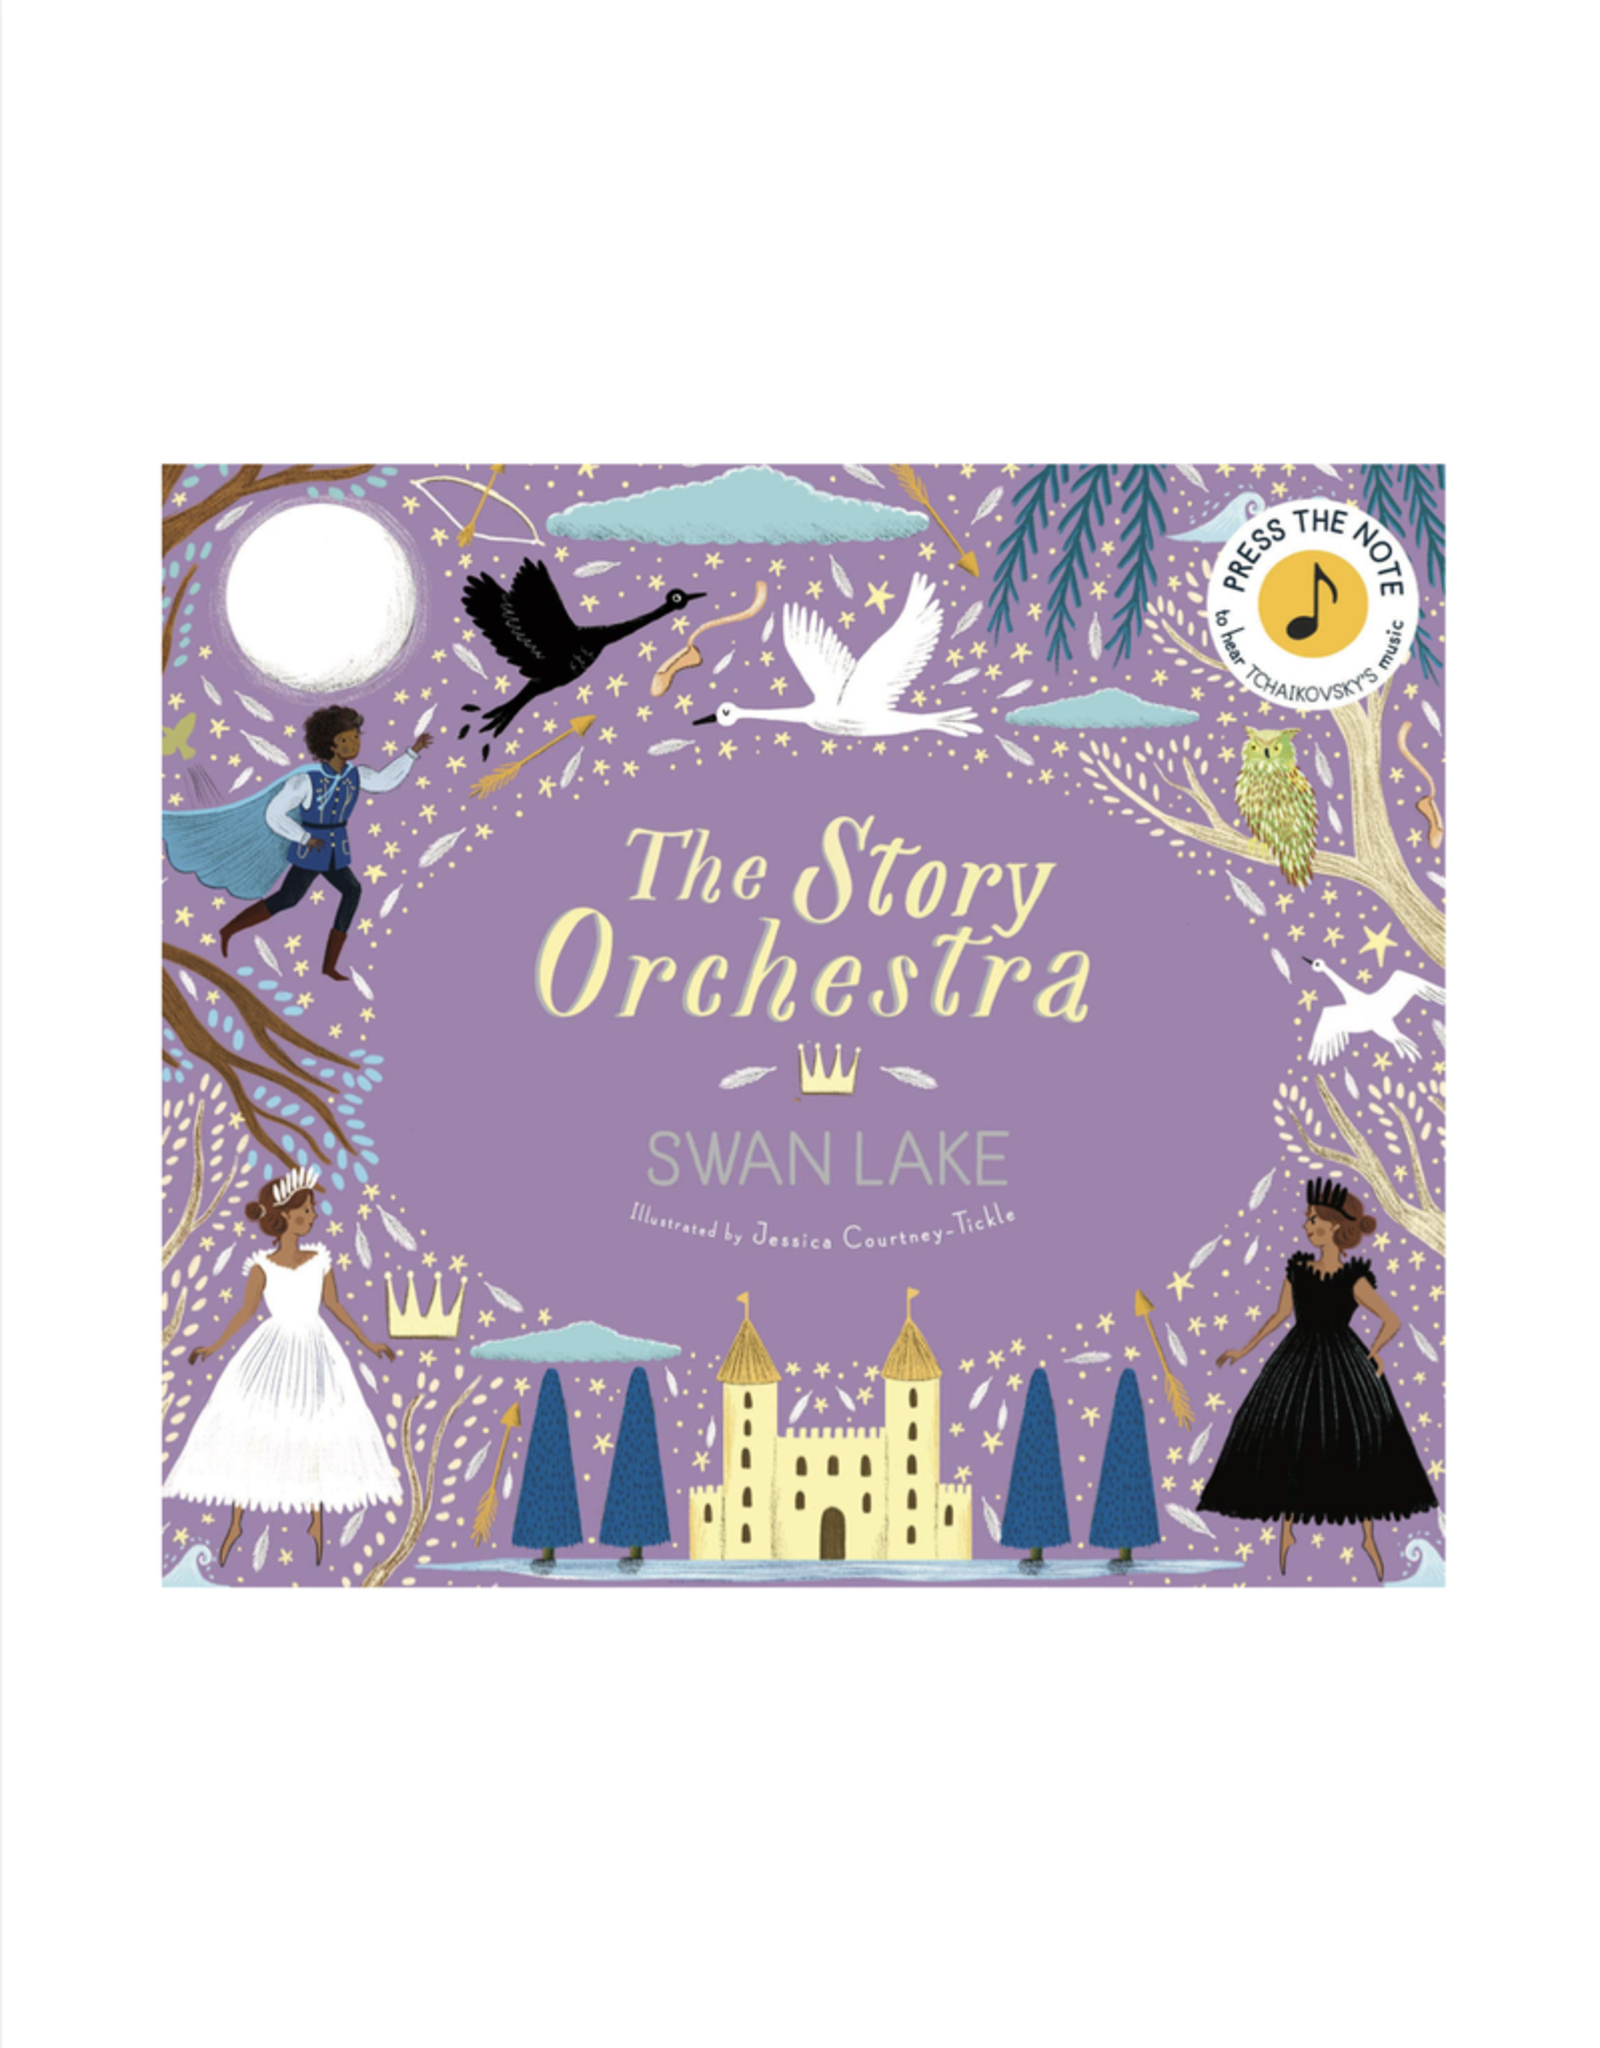 The Story Orchestra Swan Lake by: Jessica Courtney-Tickle